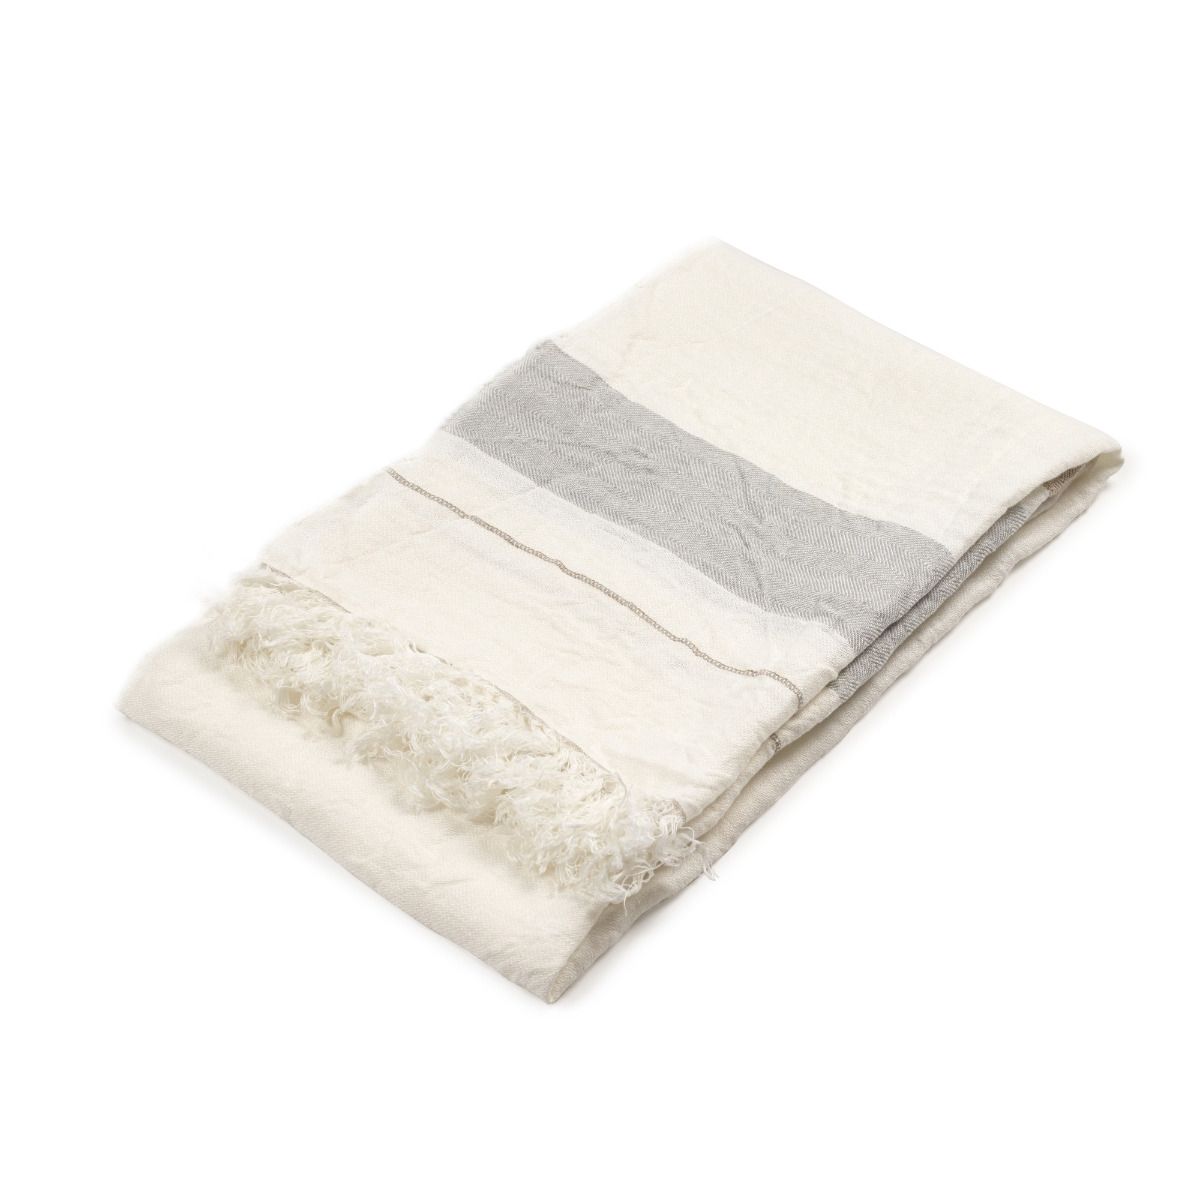 THE BROWNHOUSE INTERIORS LIBECO-LINEN  BELGIAN TOWEL OYSTER-STRIPE